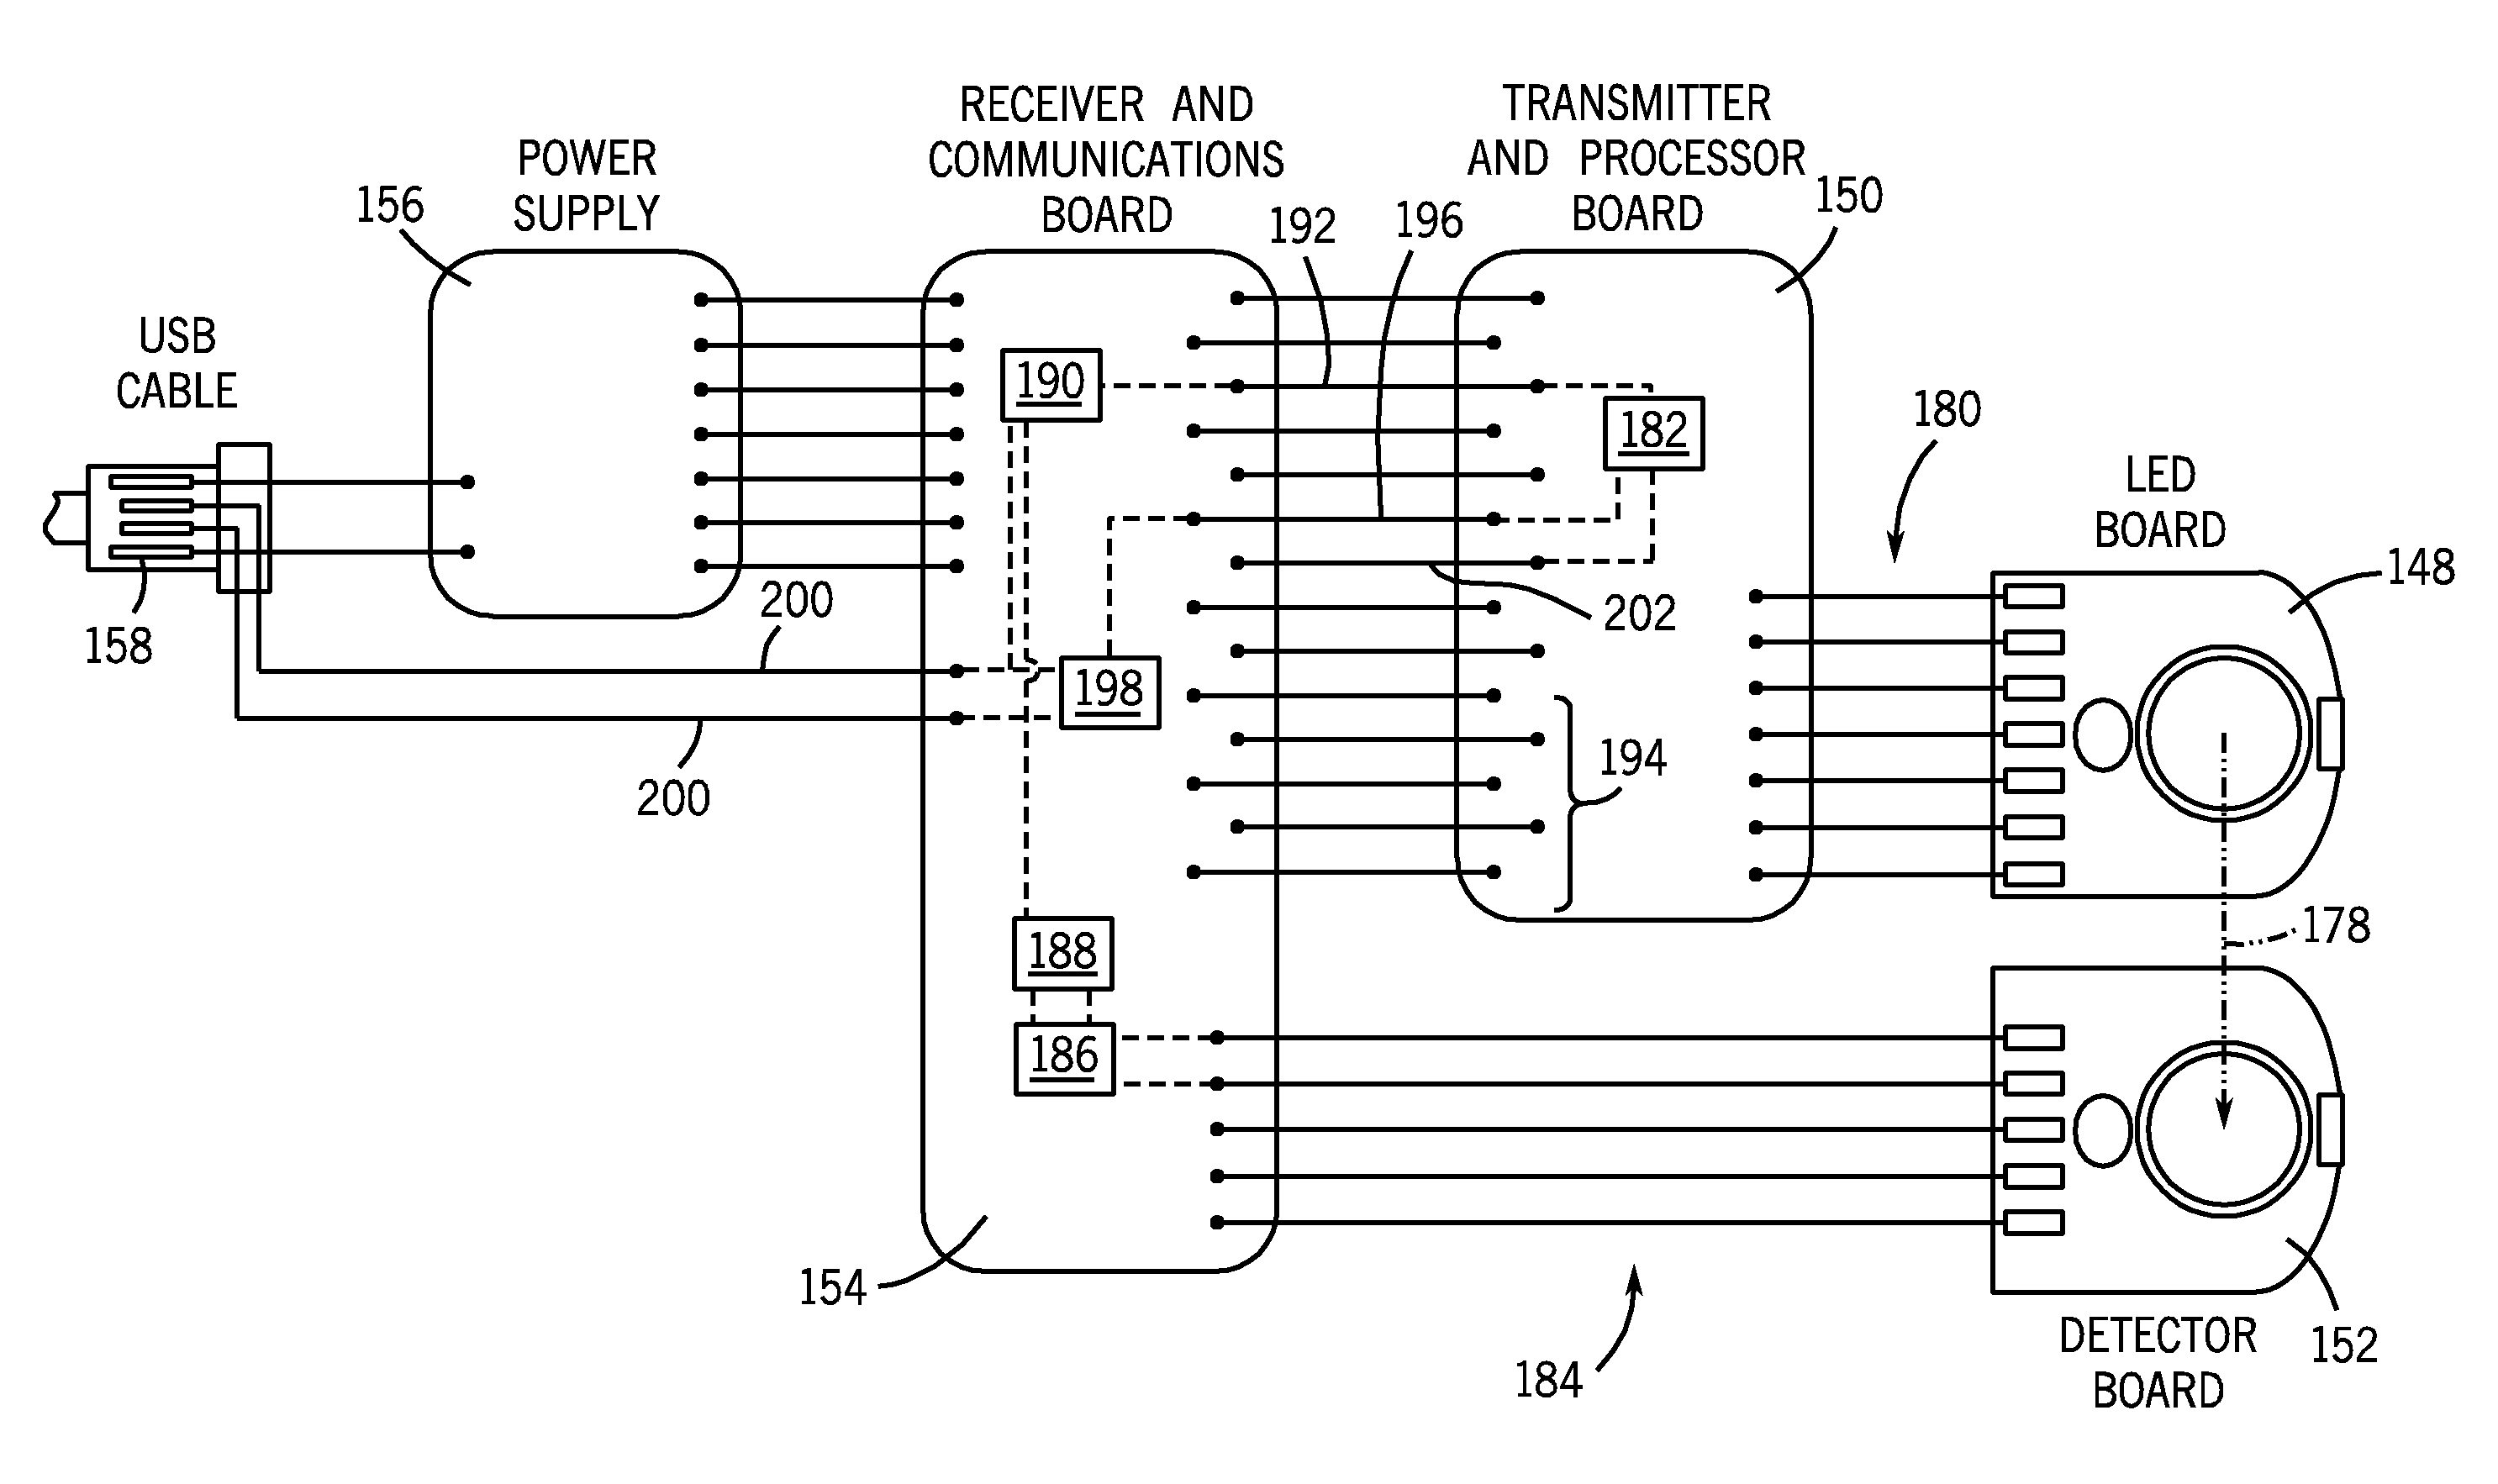 Sensor clip assembly for an optical monitoring system